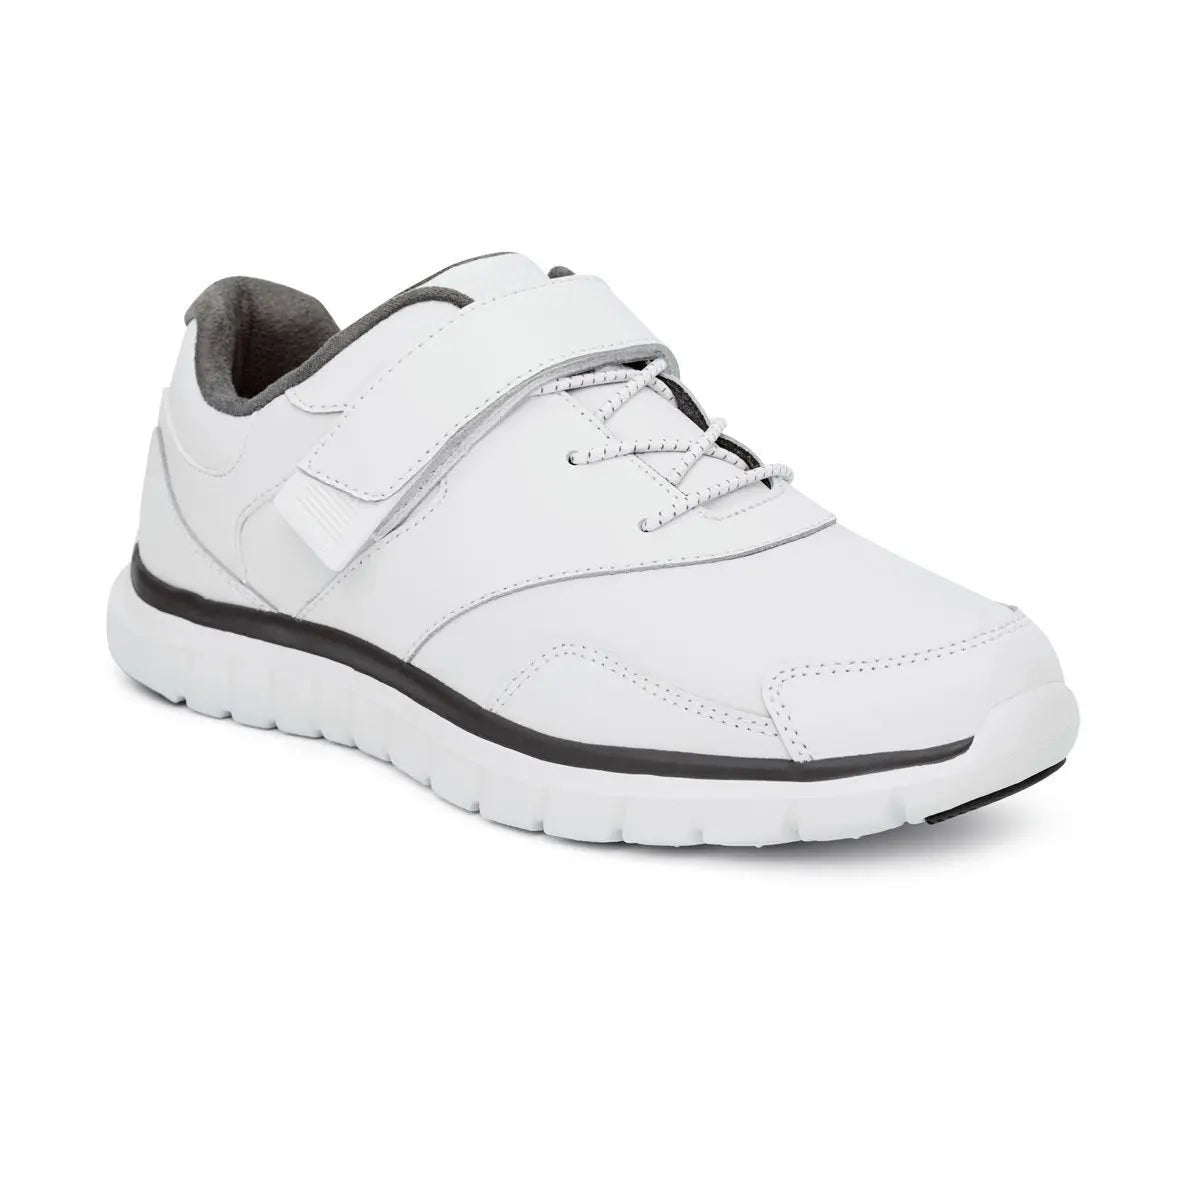 Anodyne Women's No.31 - White with a Protective Toe Box